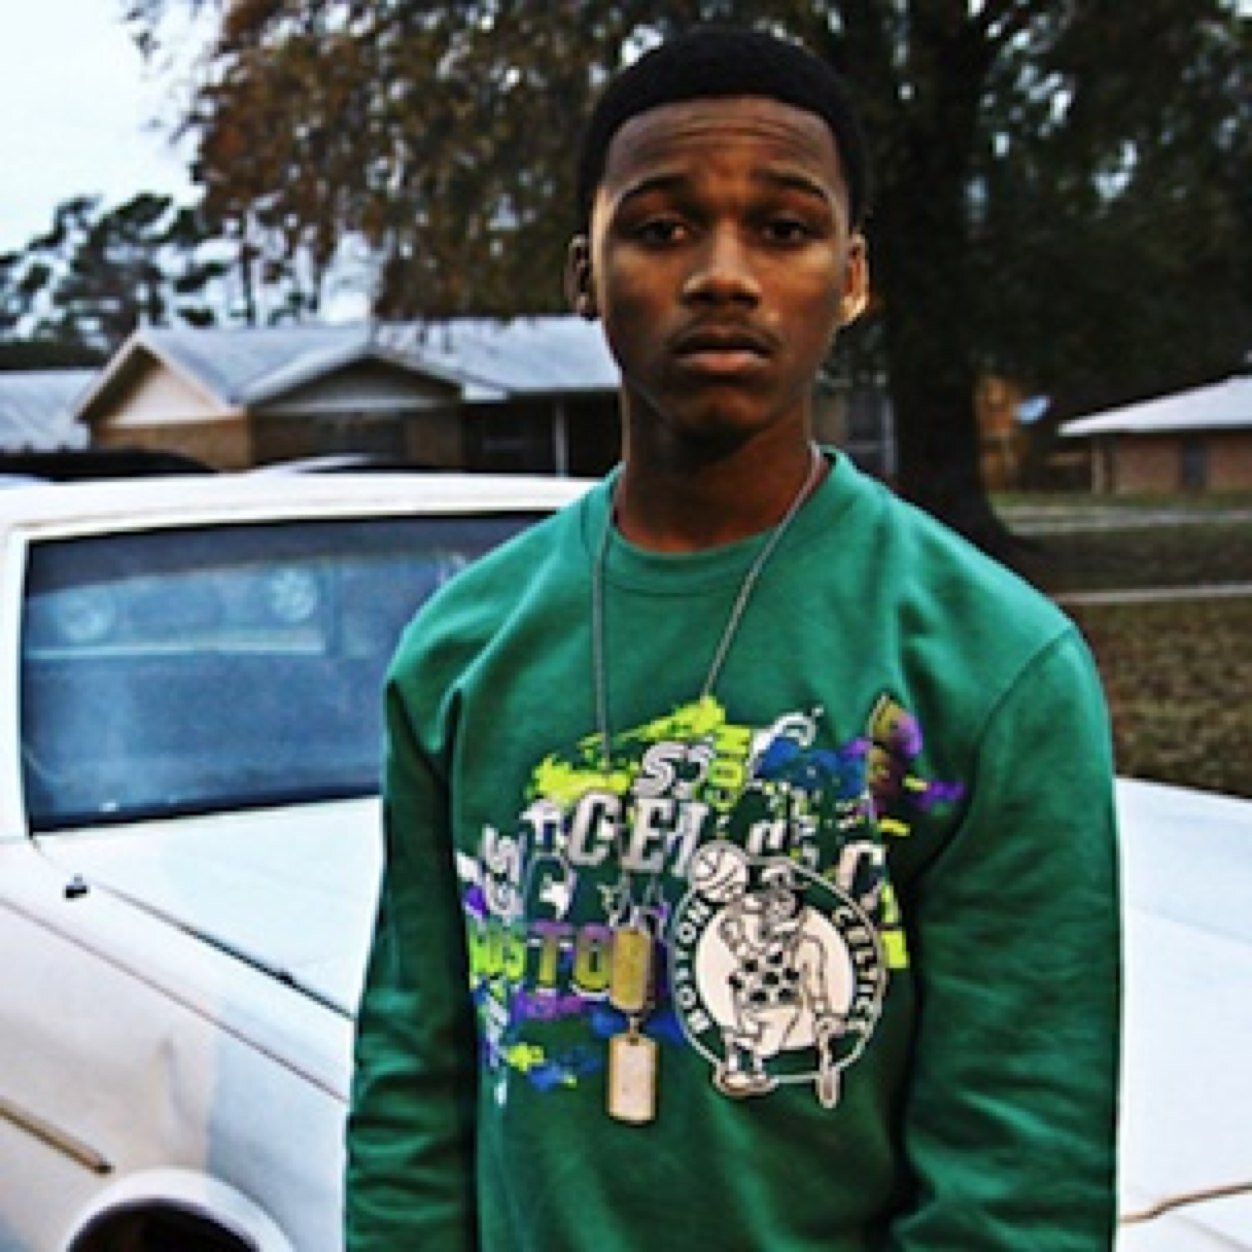 Rip Lil Snupe